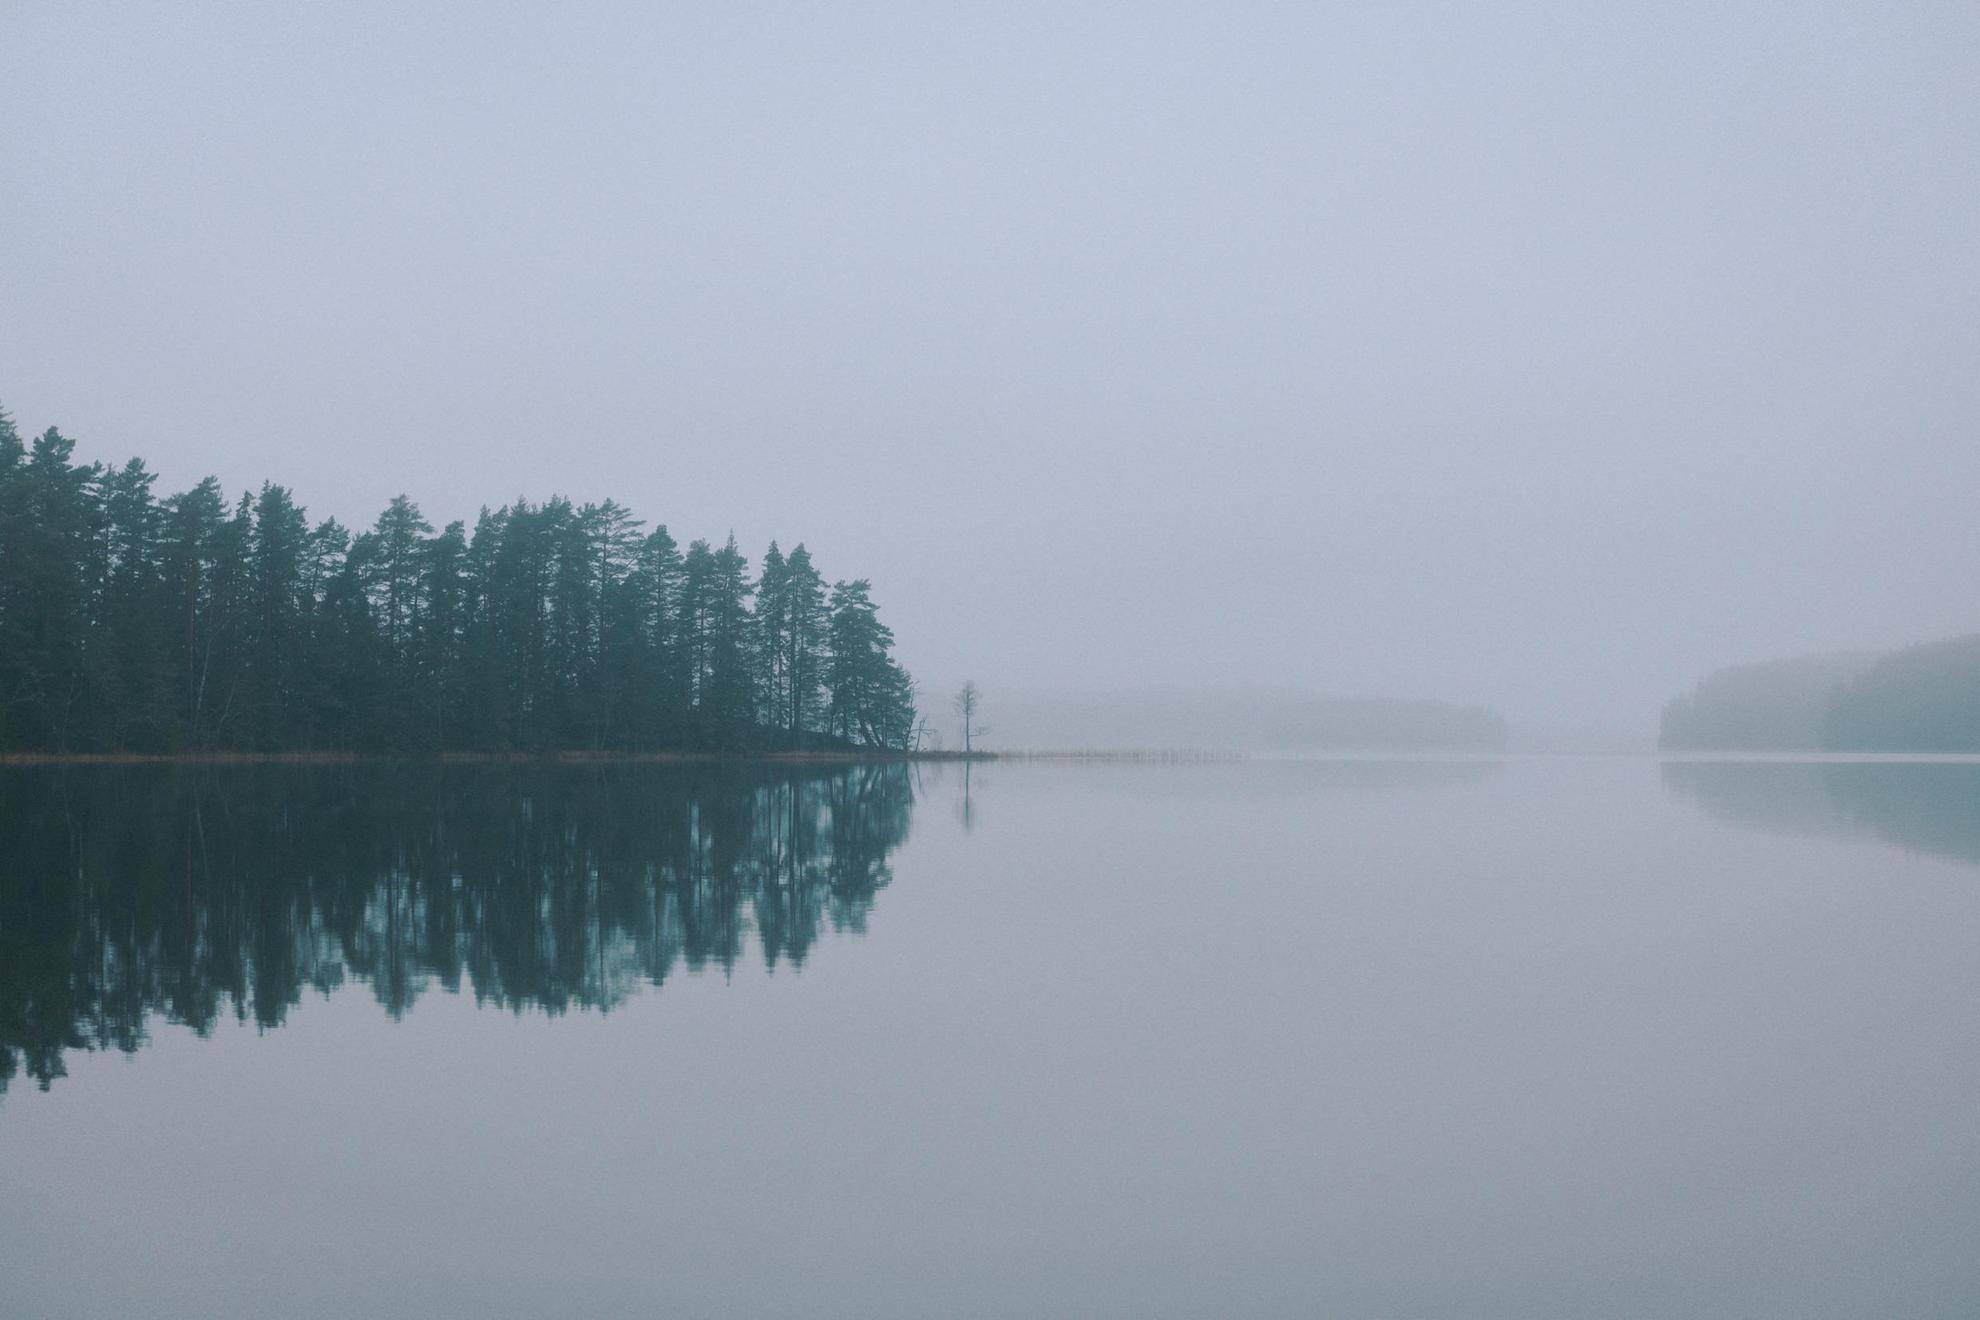 A lake in the fog. Green trees and the gray sky are reflected in the calm water.